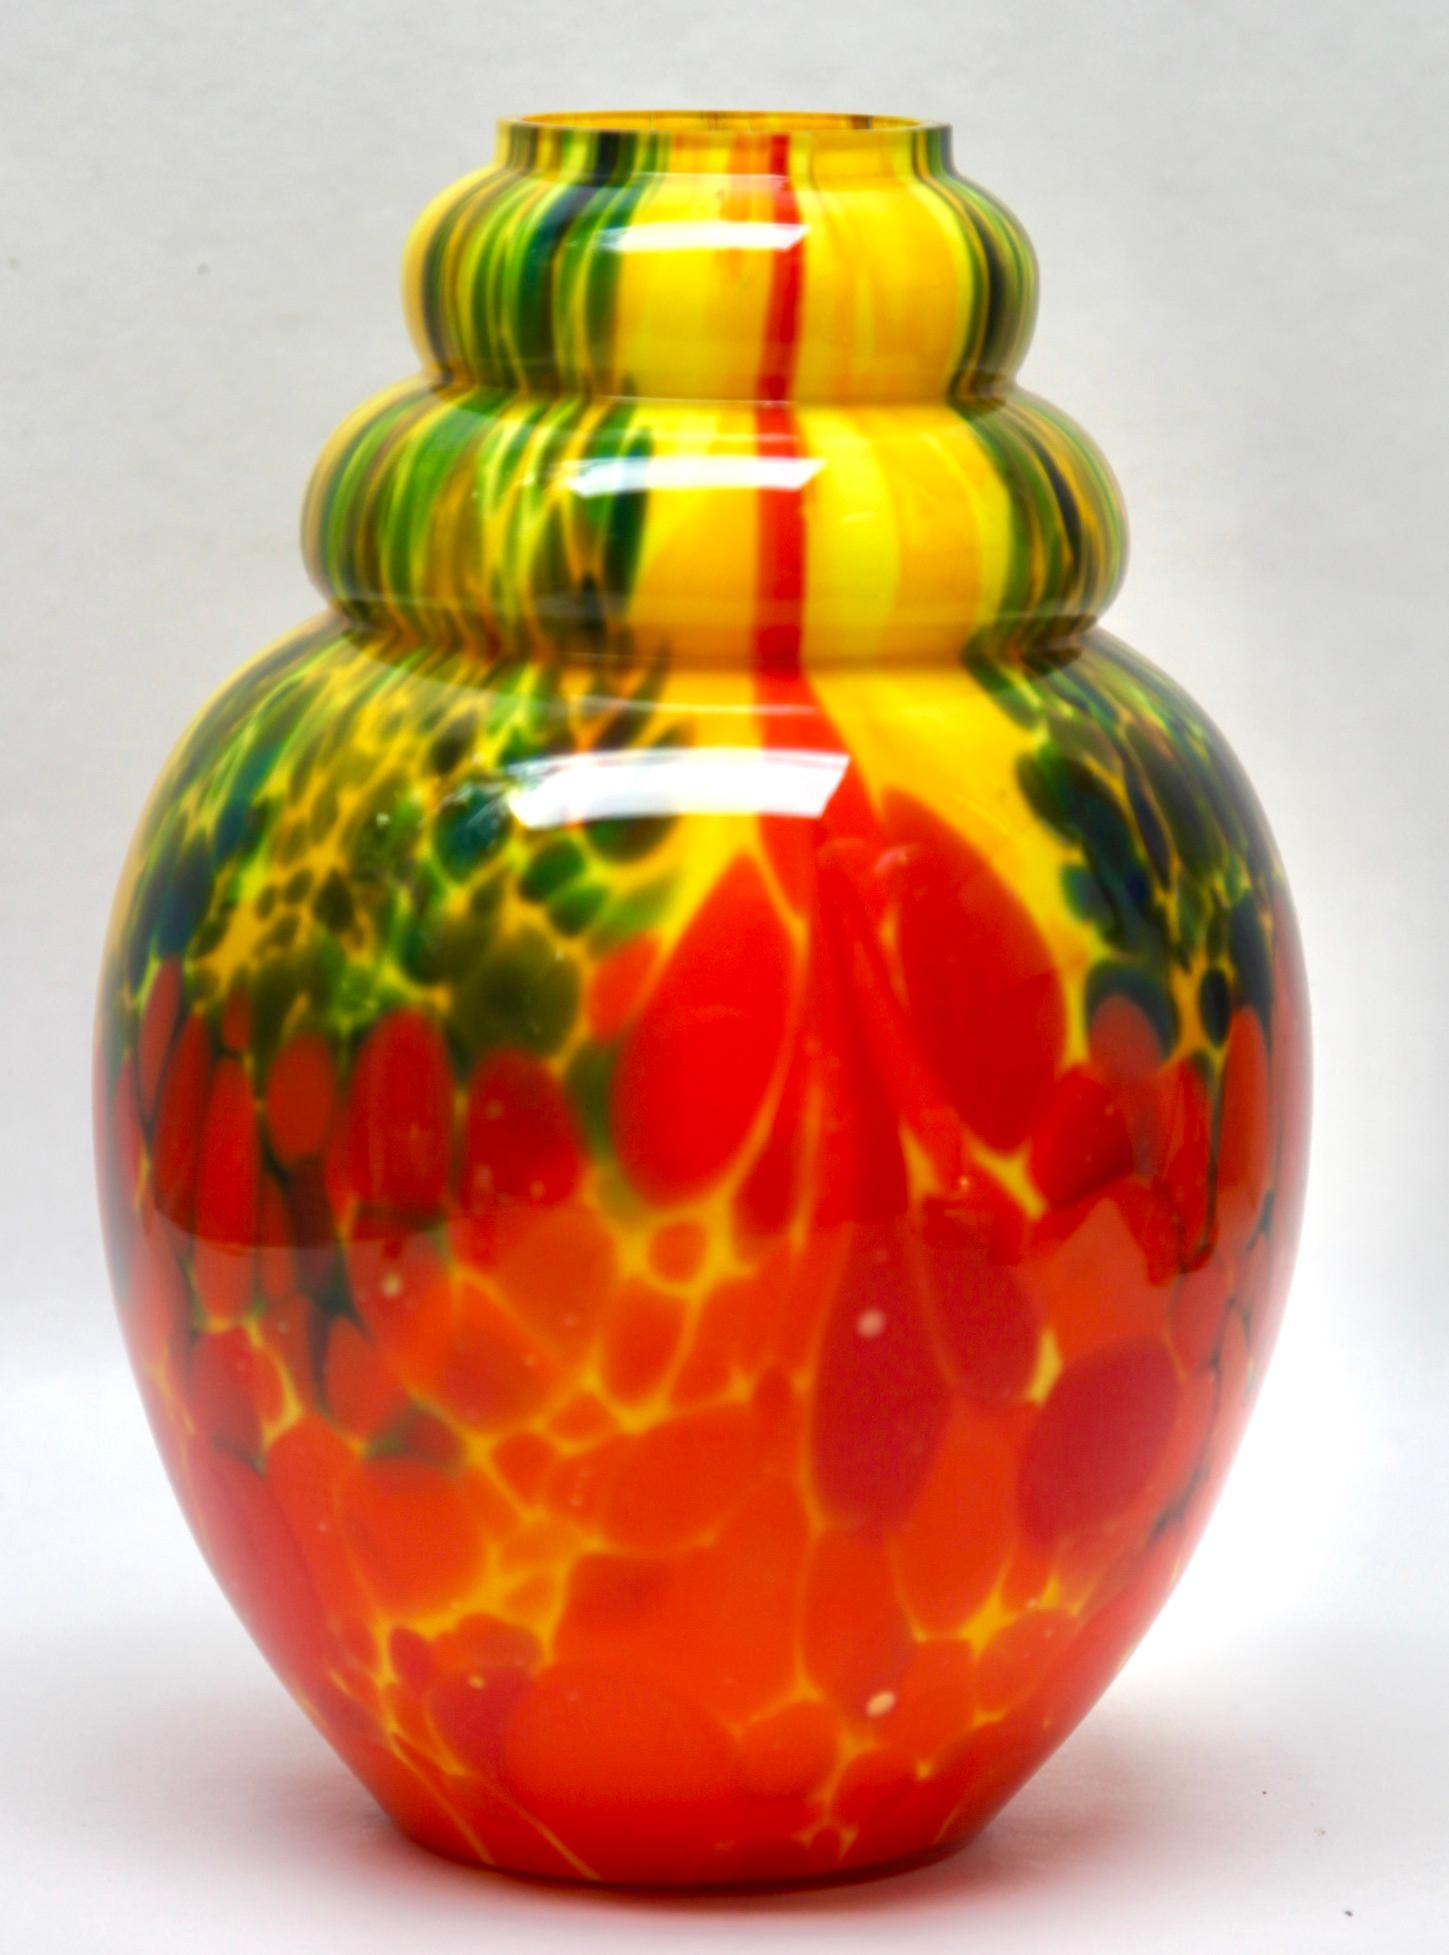 Hand-Crafted Art Deco Vase Multiple Layered Glass Scailmont by Henri Heemskerk, 1886-1953 For Sale